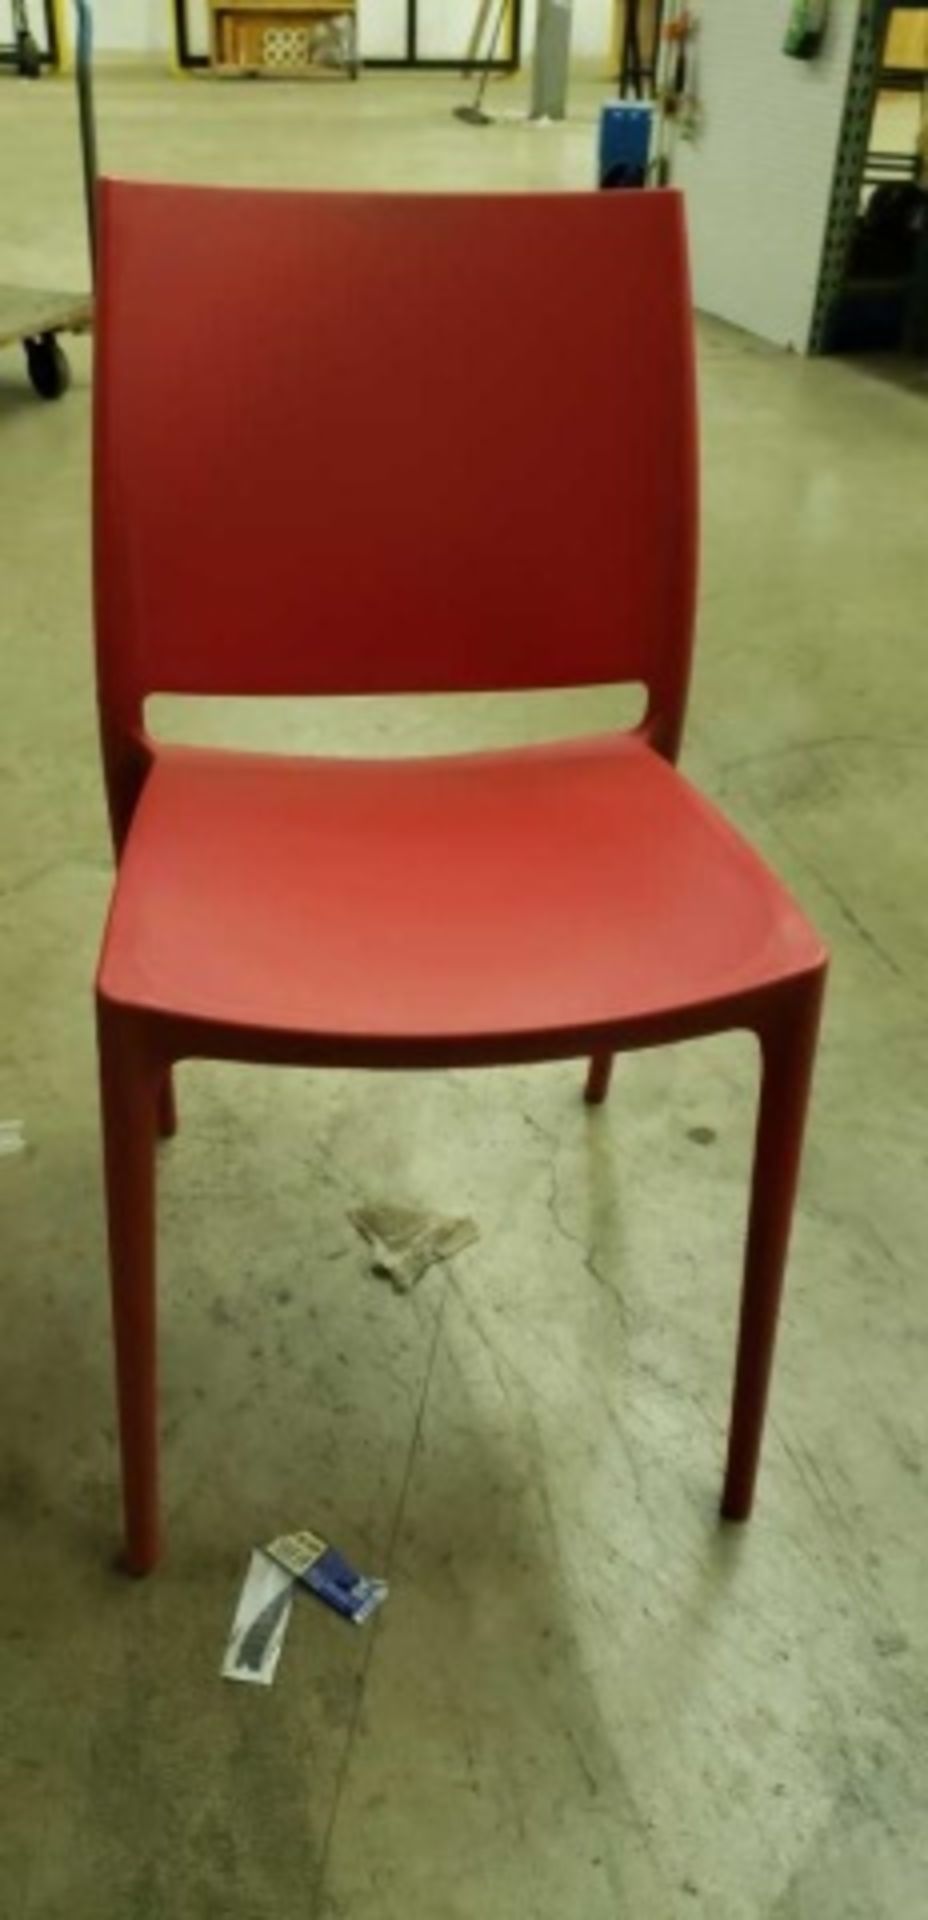 Martinique side chair - red, 8 boxes with 4 each, 32 total. - Image 2 of 5